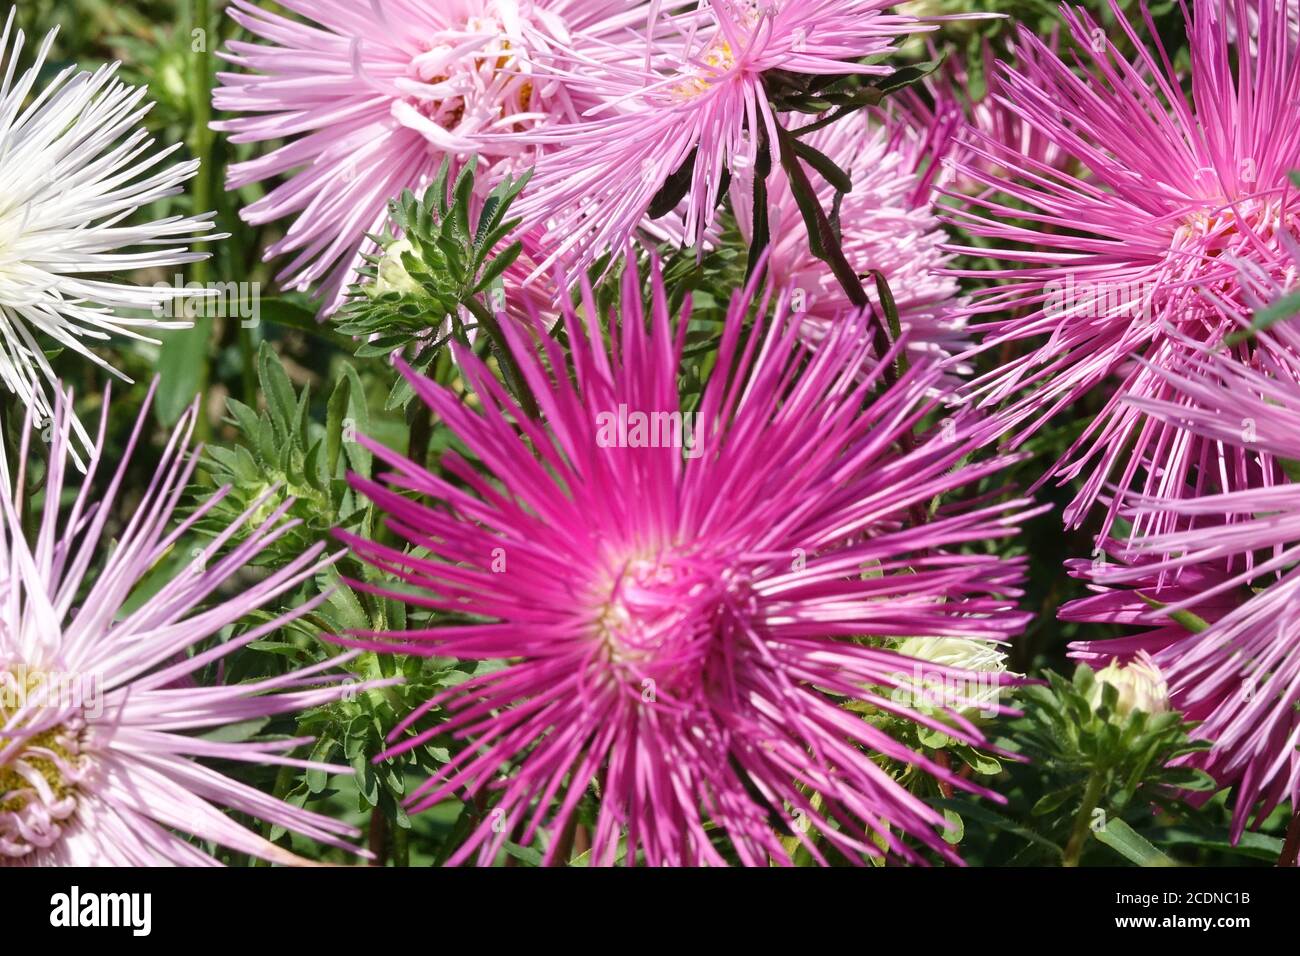 August flowers China aster needle garden flowerbed Stock Photo